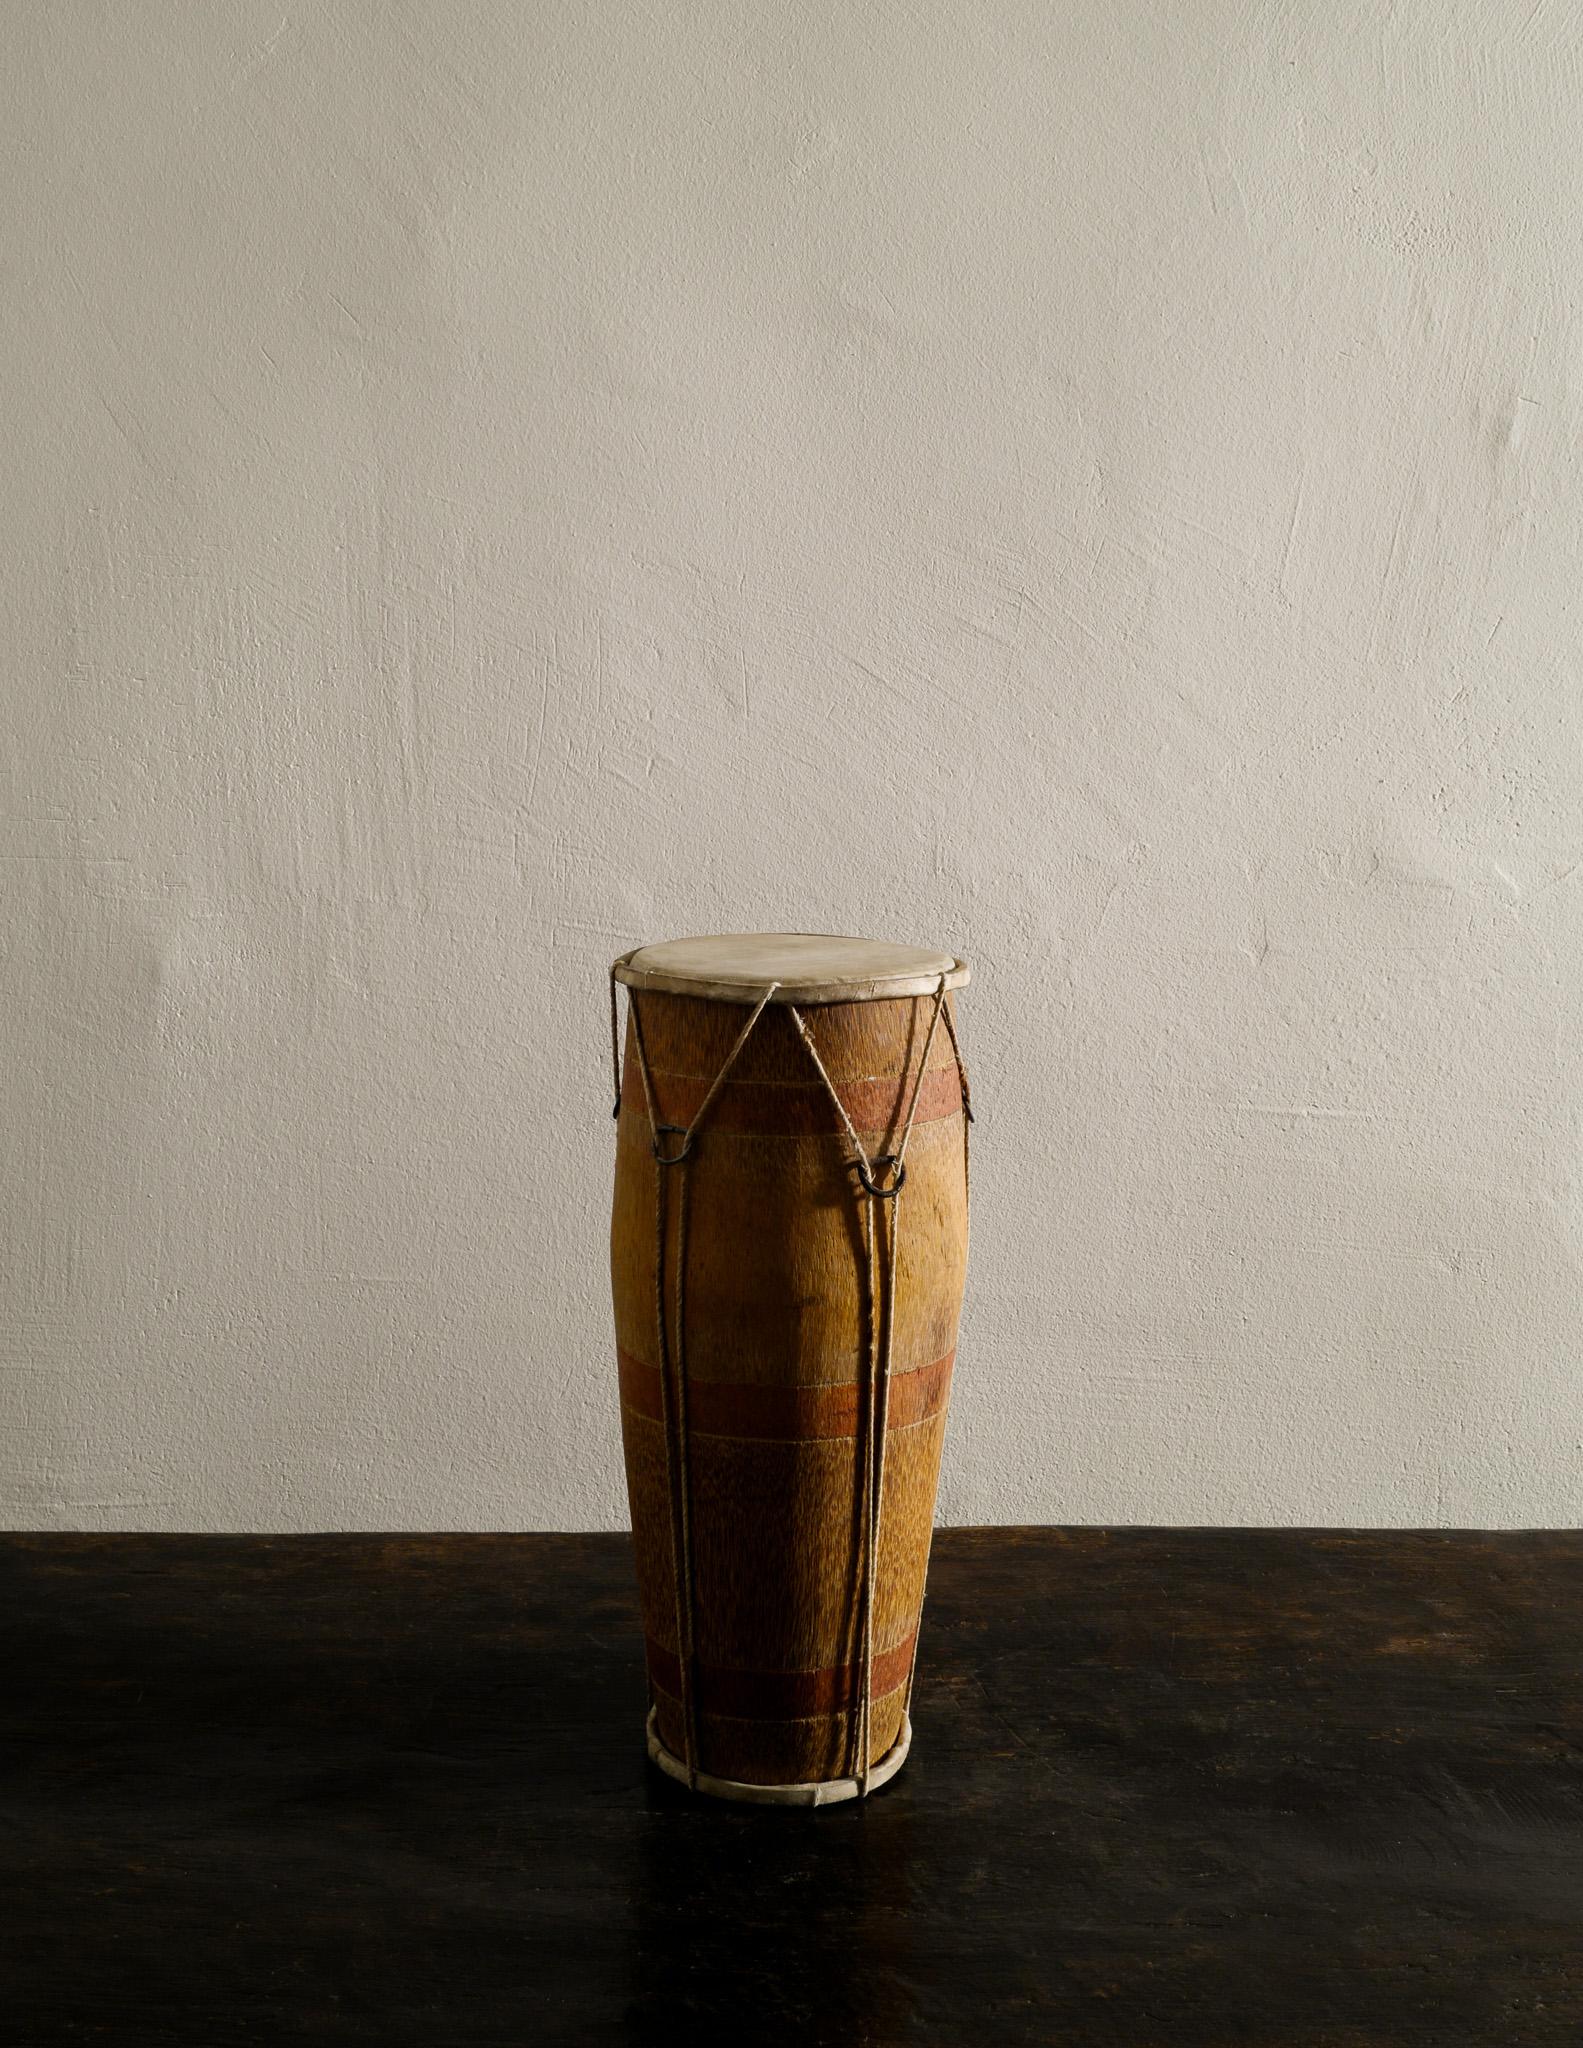 Rare and beautiful handmade drum in painted wood and hide produced i Africa early 1900s / 20th century. In original condition. 
Very decorative and genuine and works well with many classic mid century design furniture and contemporary art.